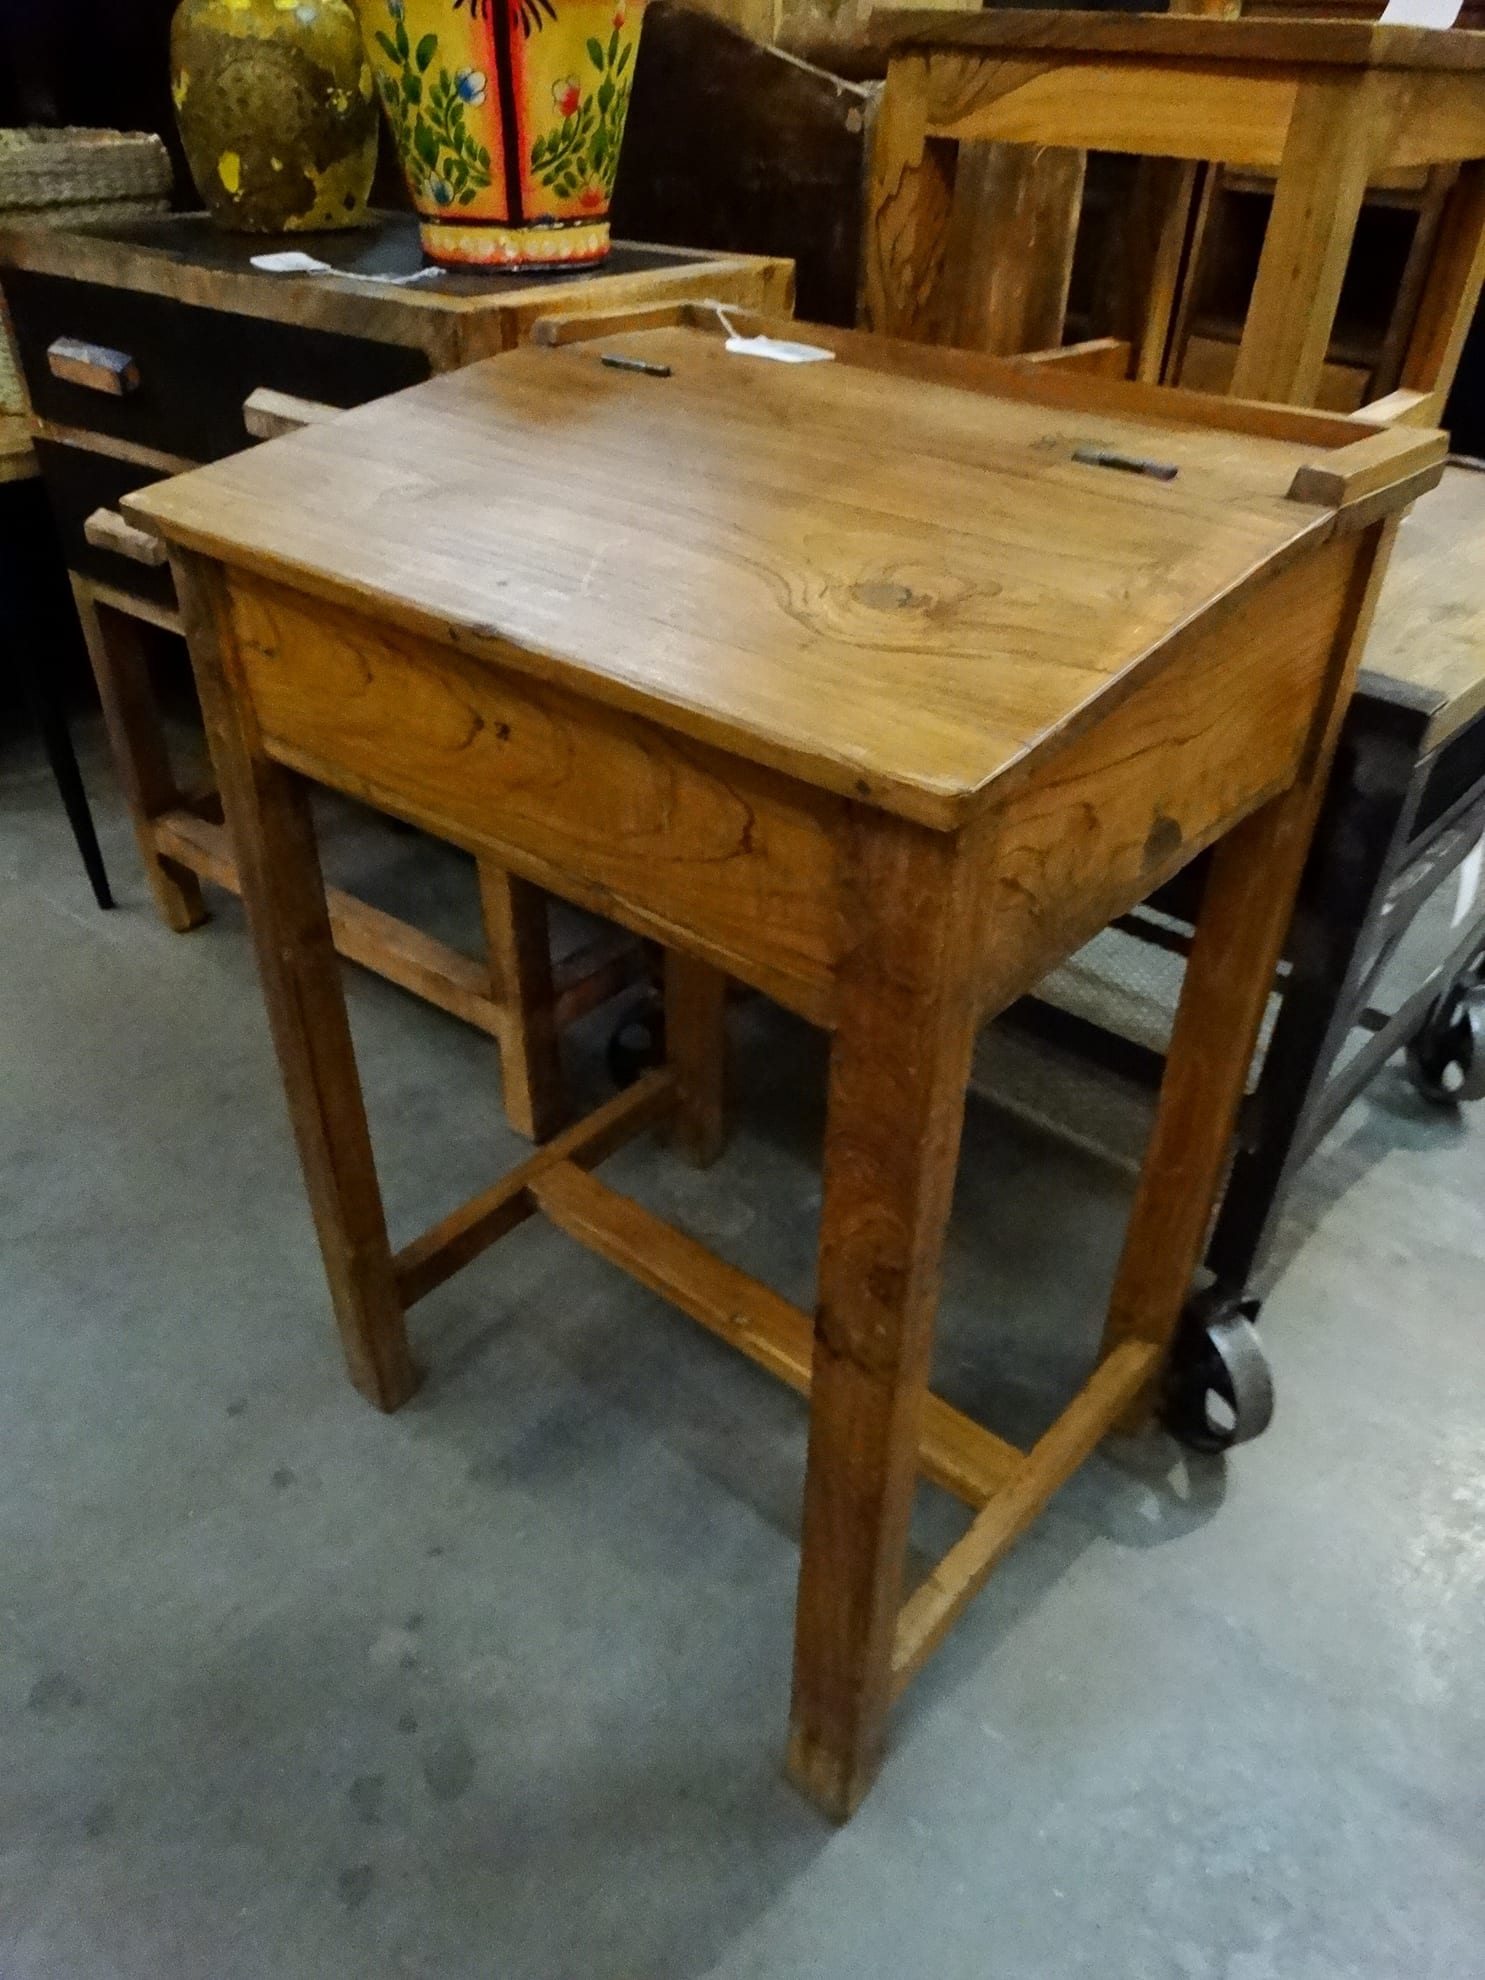 Natural Rustic Classic Desk Is Perfect For Your Kitchen Or Kid S Room